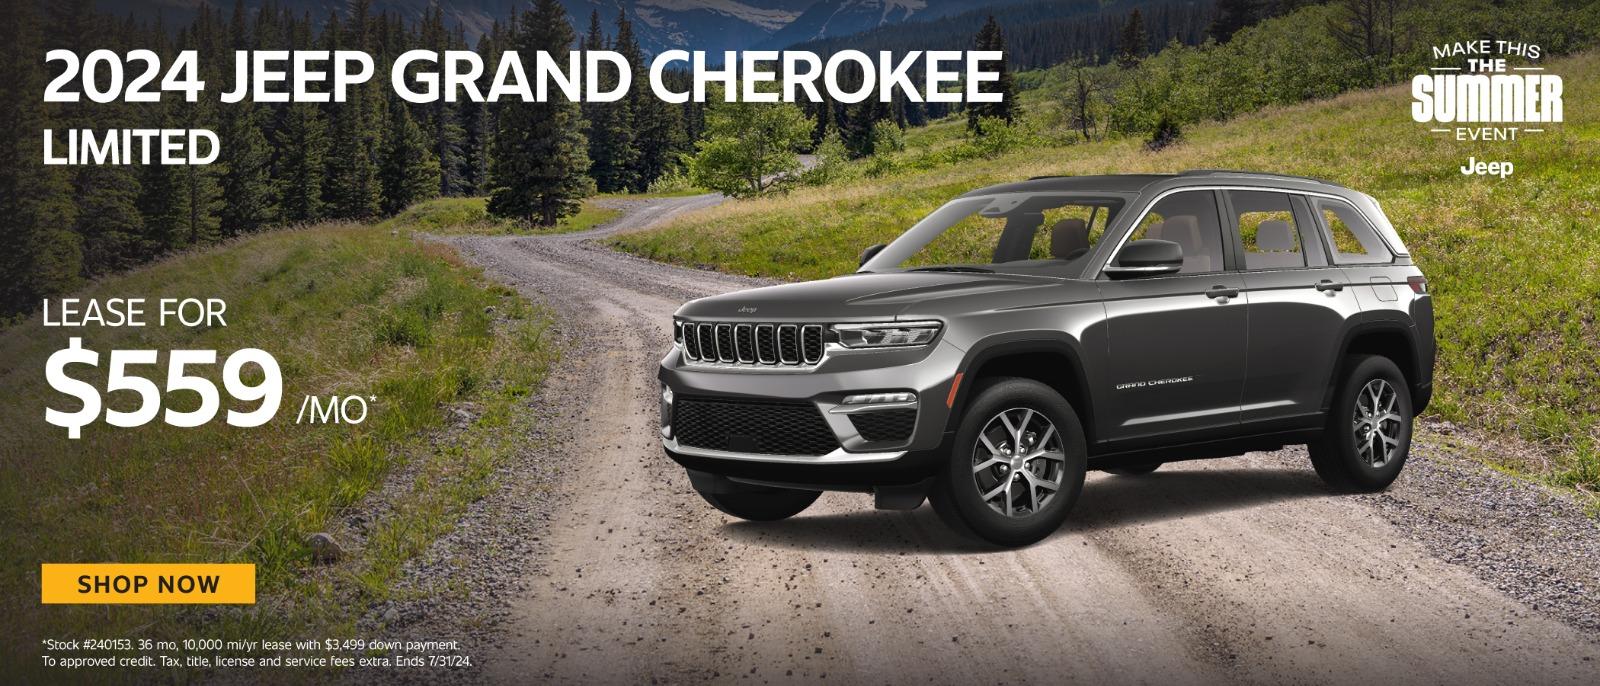 2024 Jeep  Grand Cherokee Lease for $559 per month